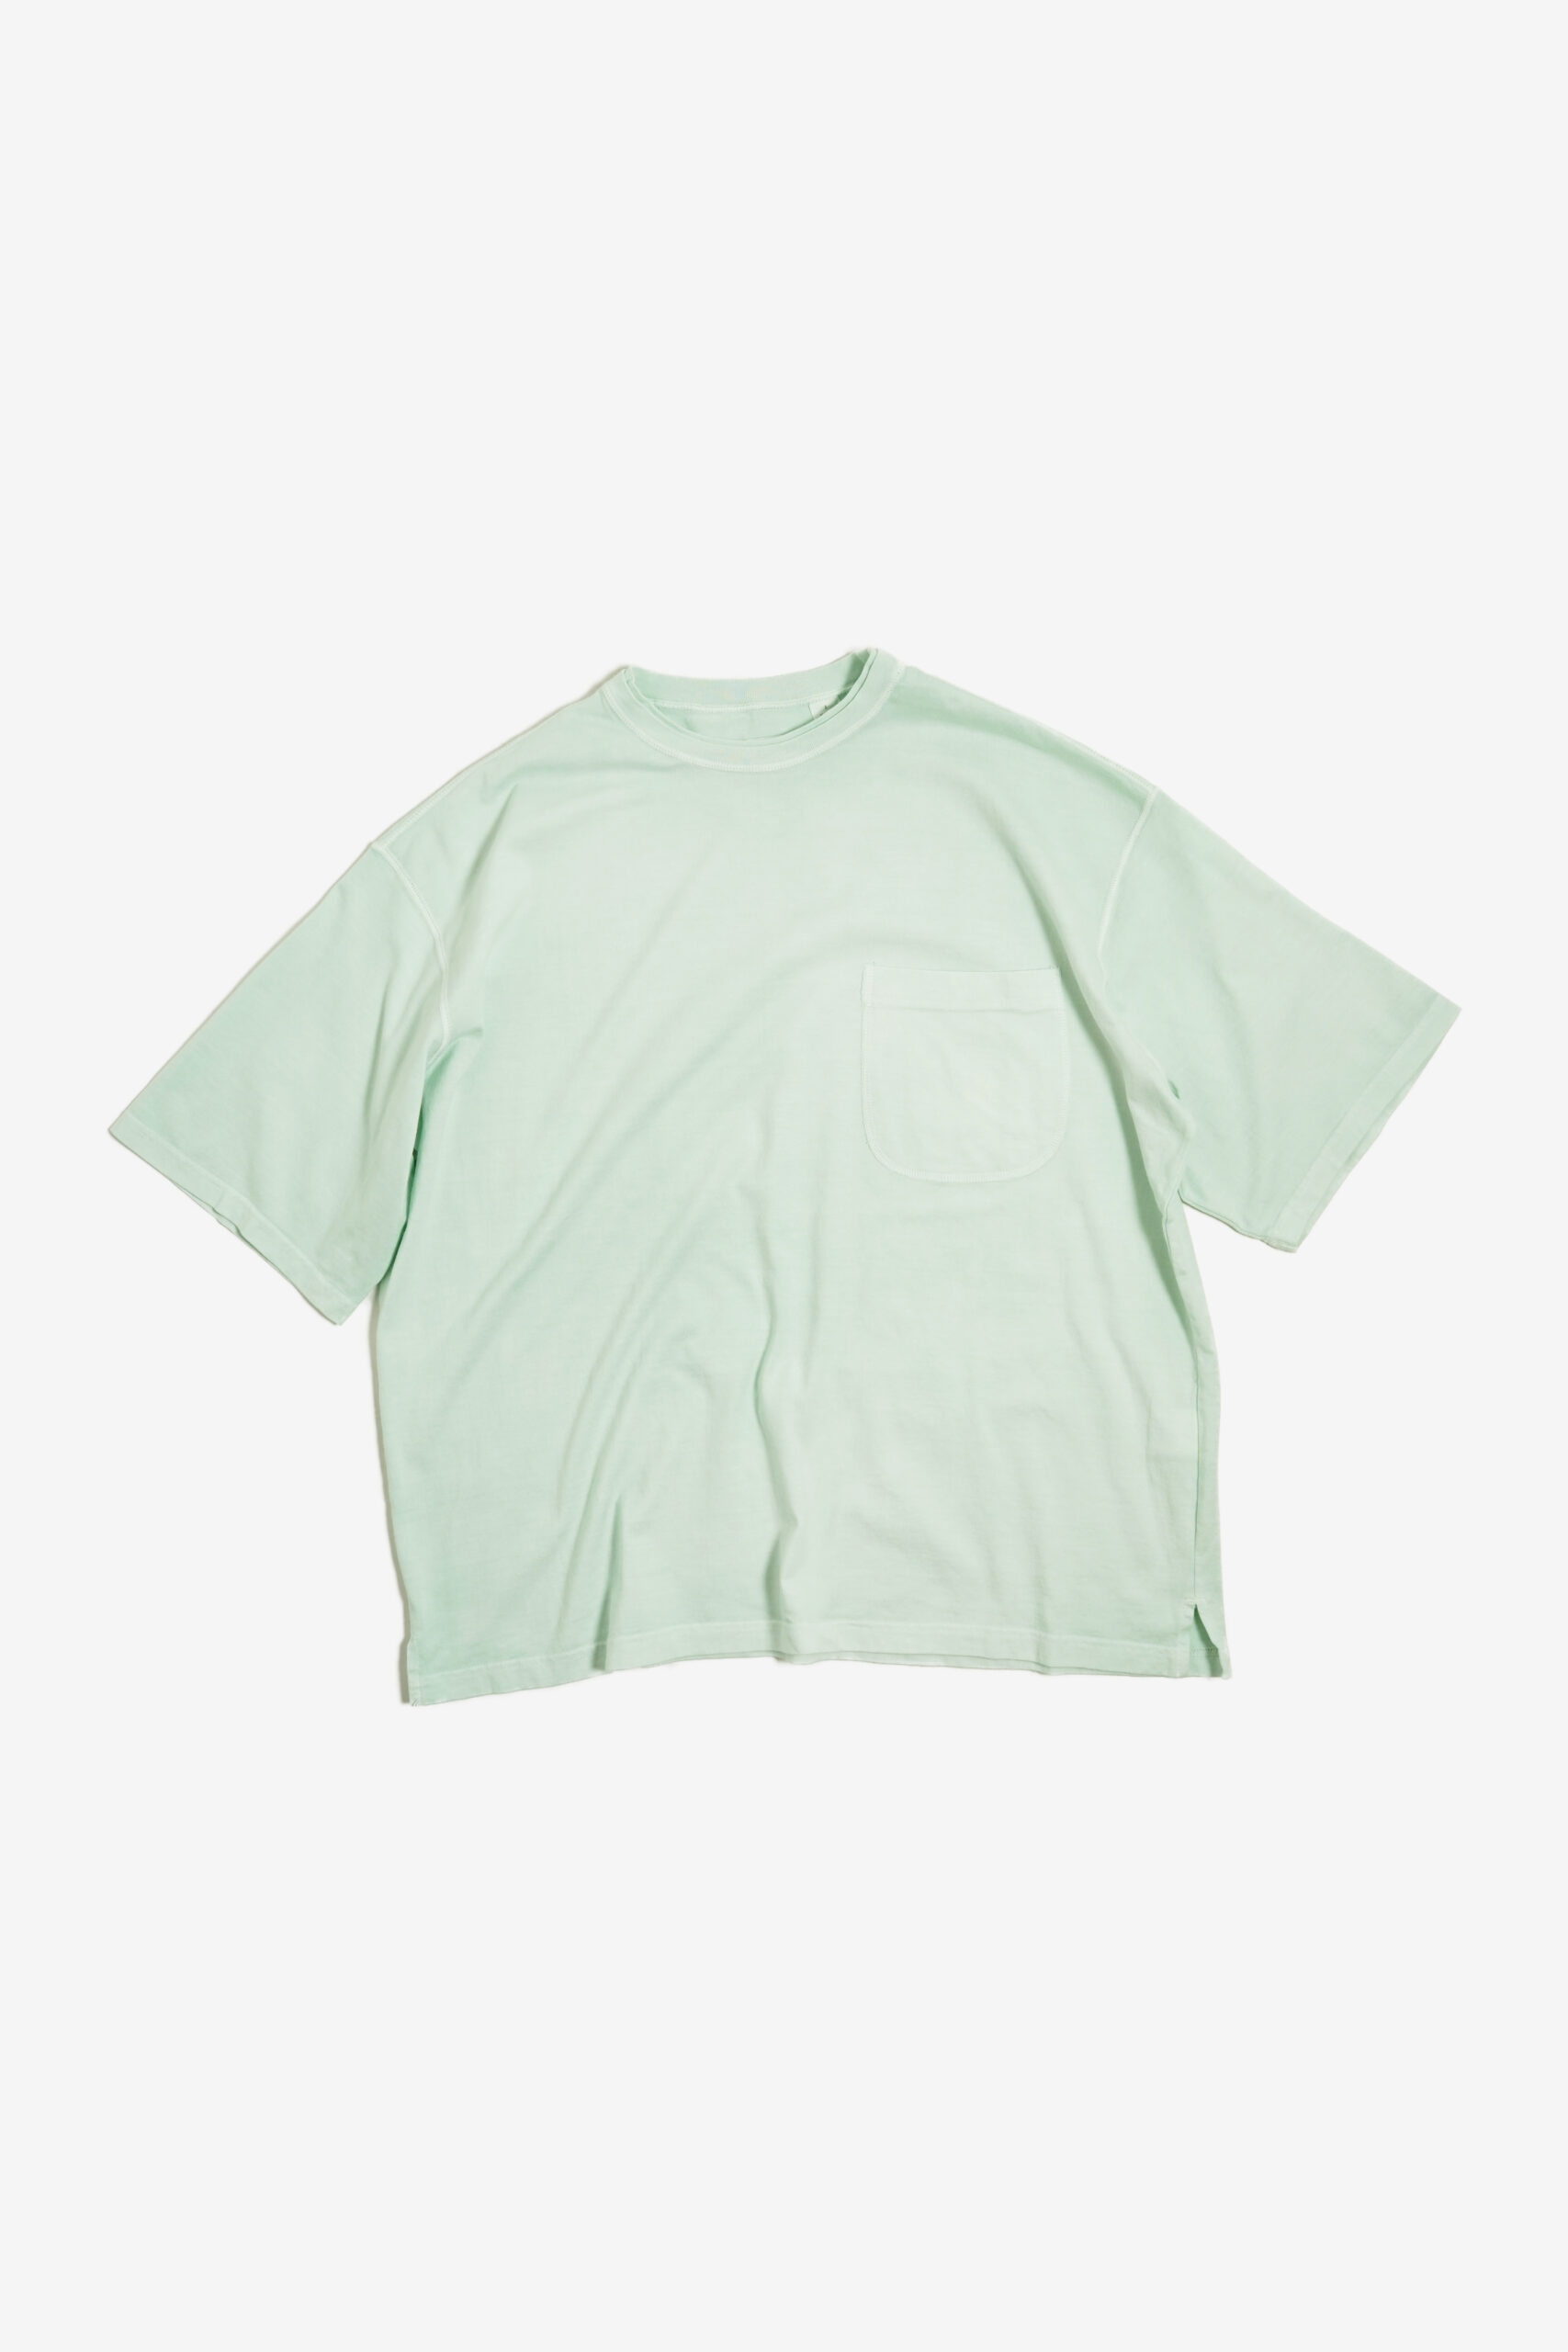 PIGMENT DYED DOUBLE COLLAR S/S T SHIRTS